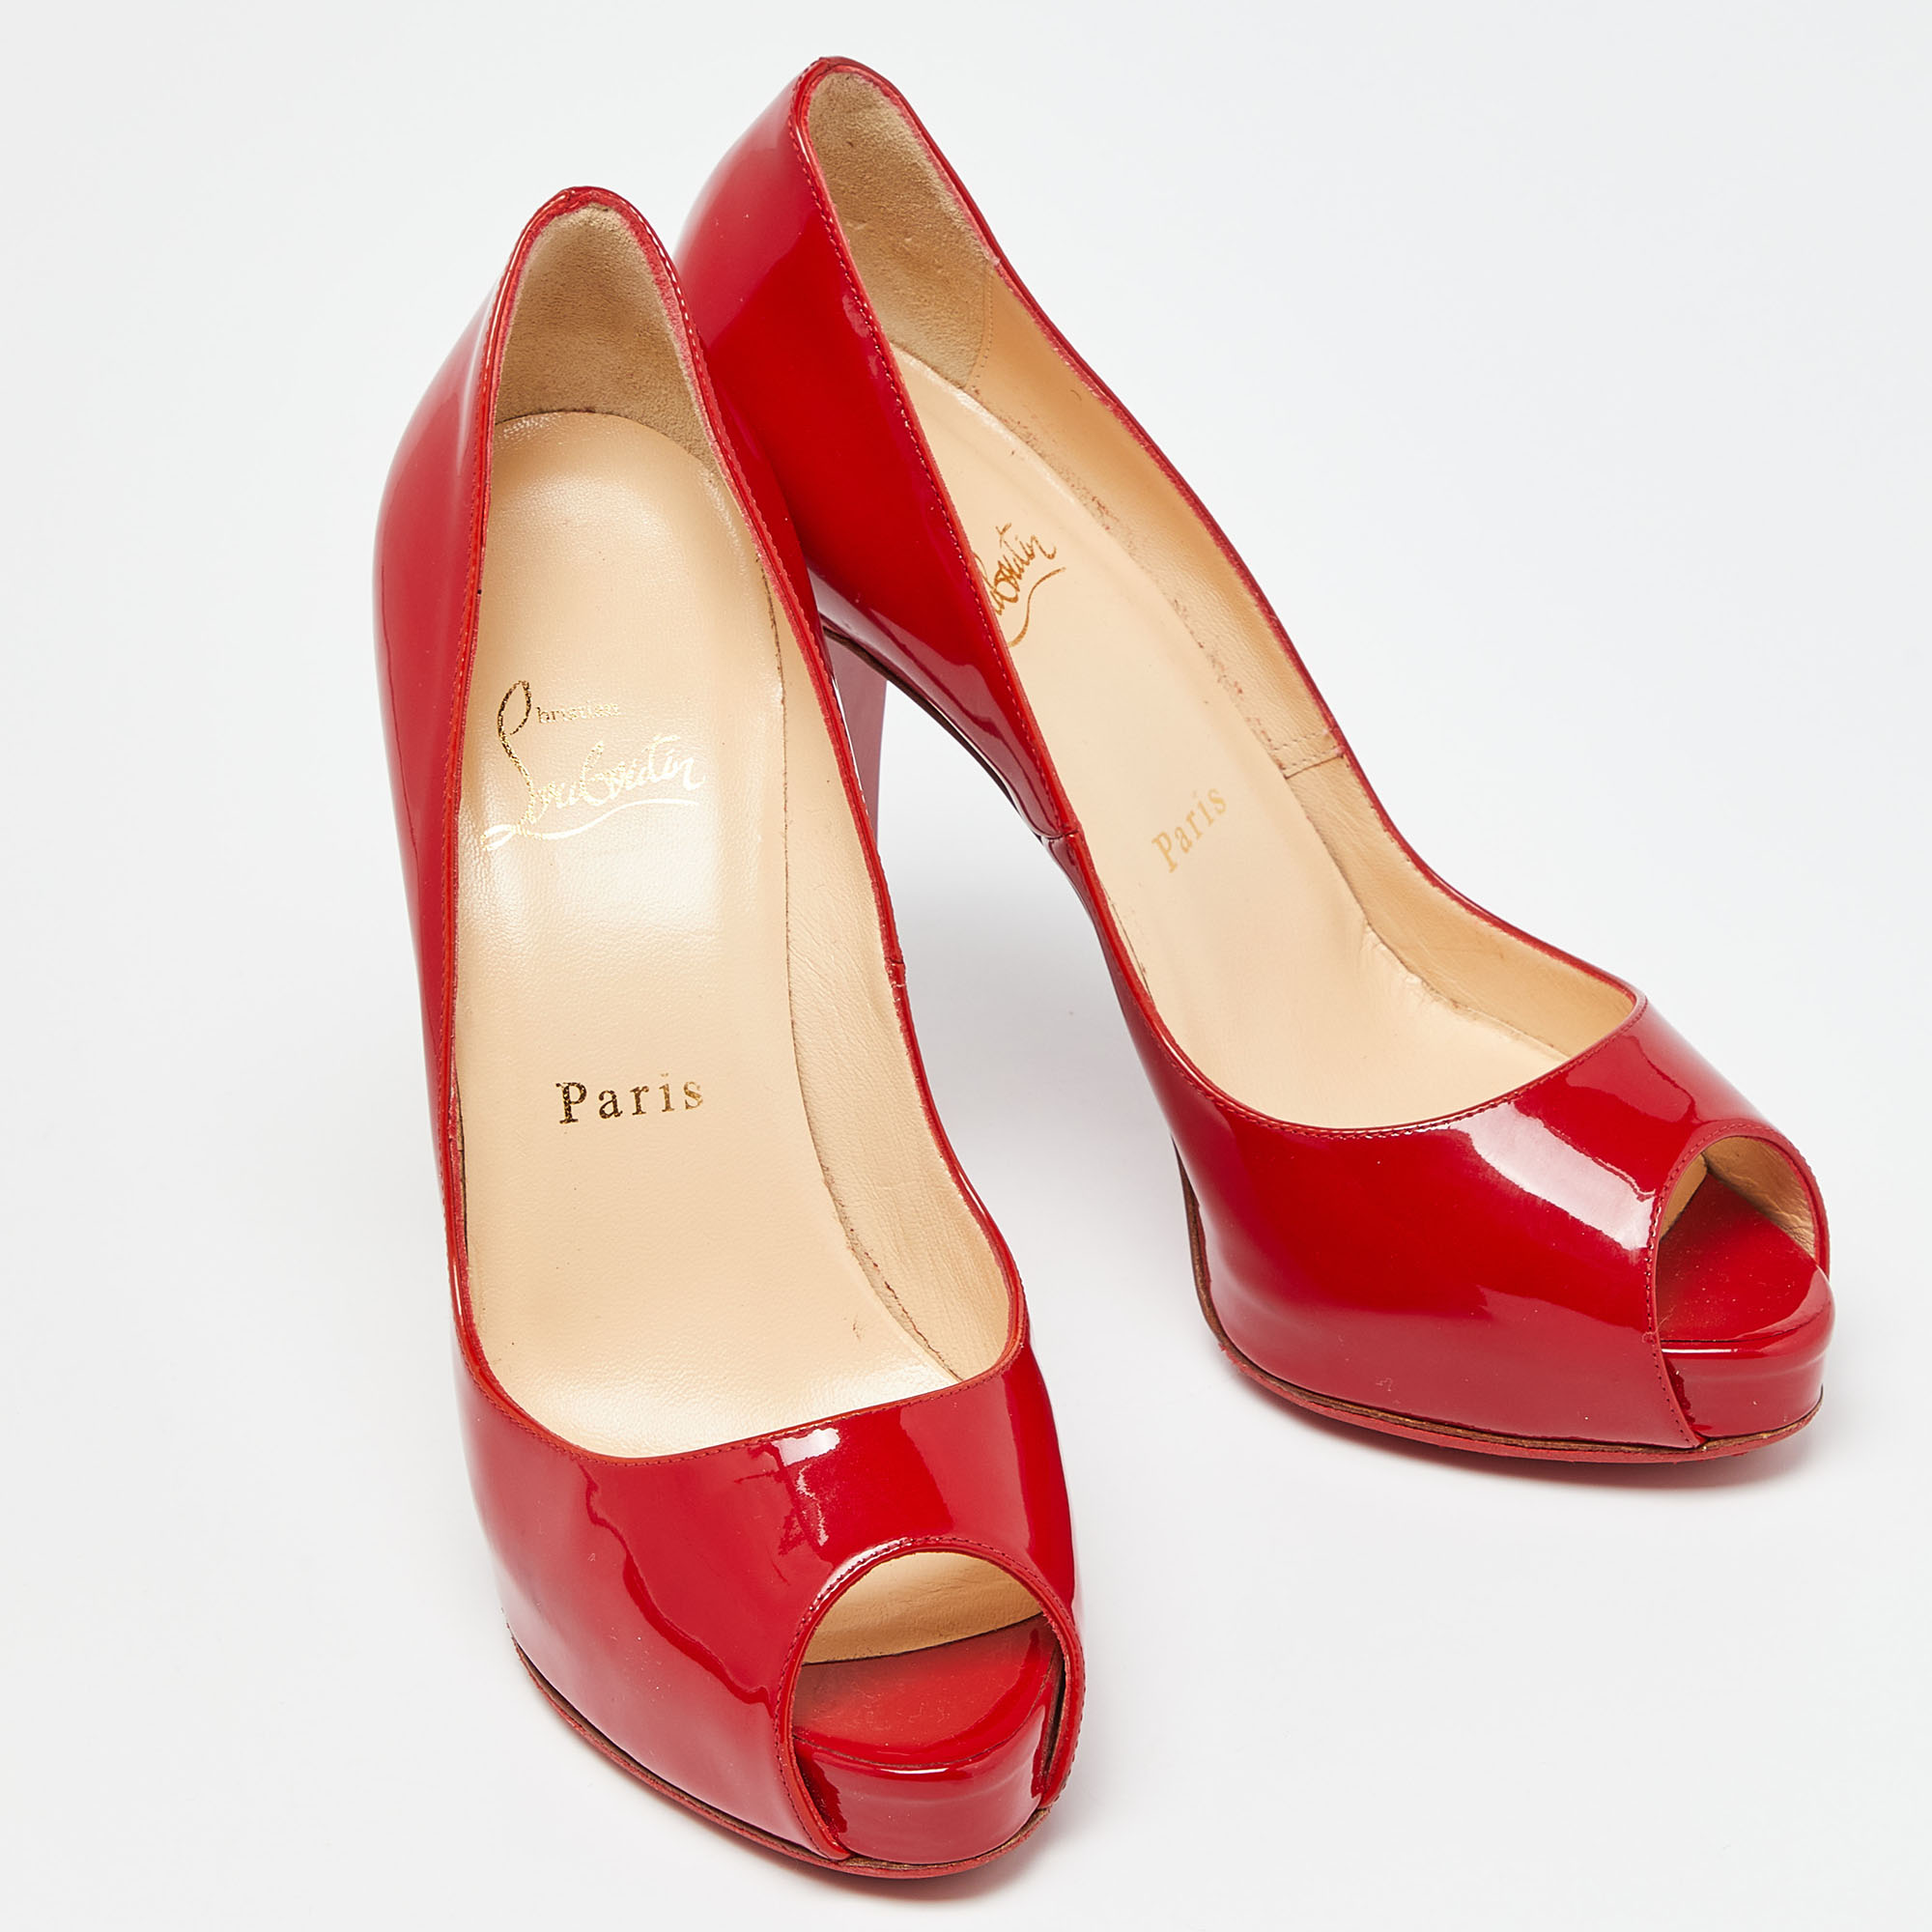 Christian Louboutin Red Patent Leather Very Prive Platform Peep Toe Pumps Size 37.5